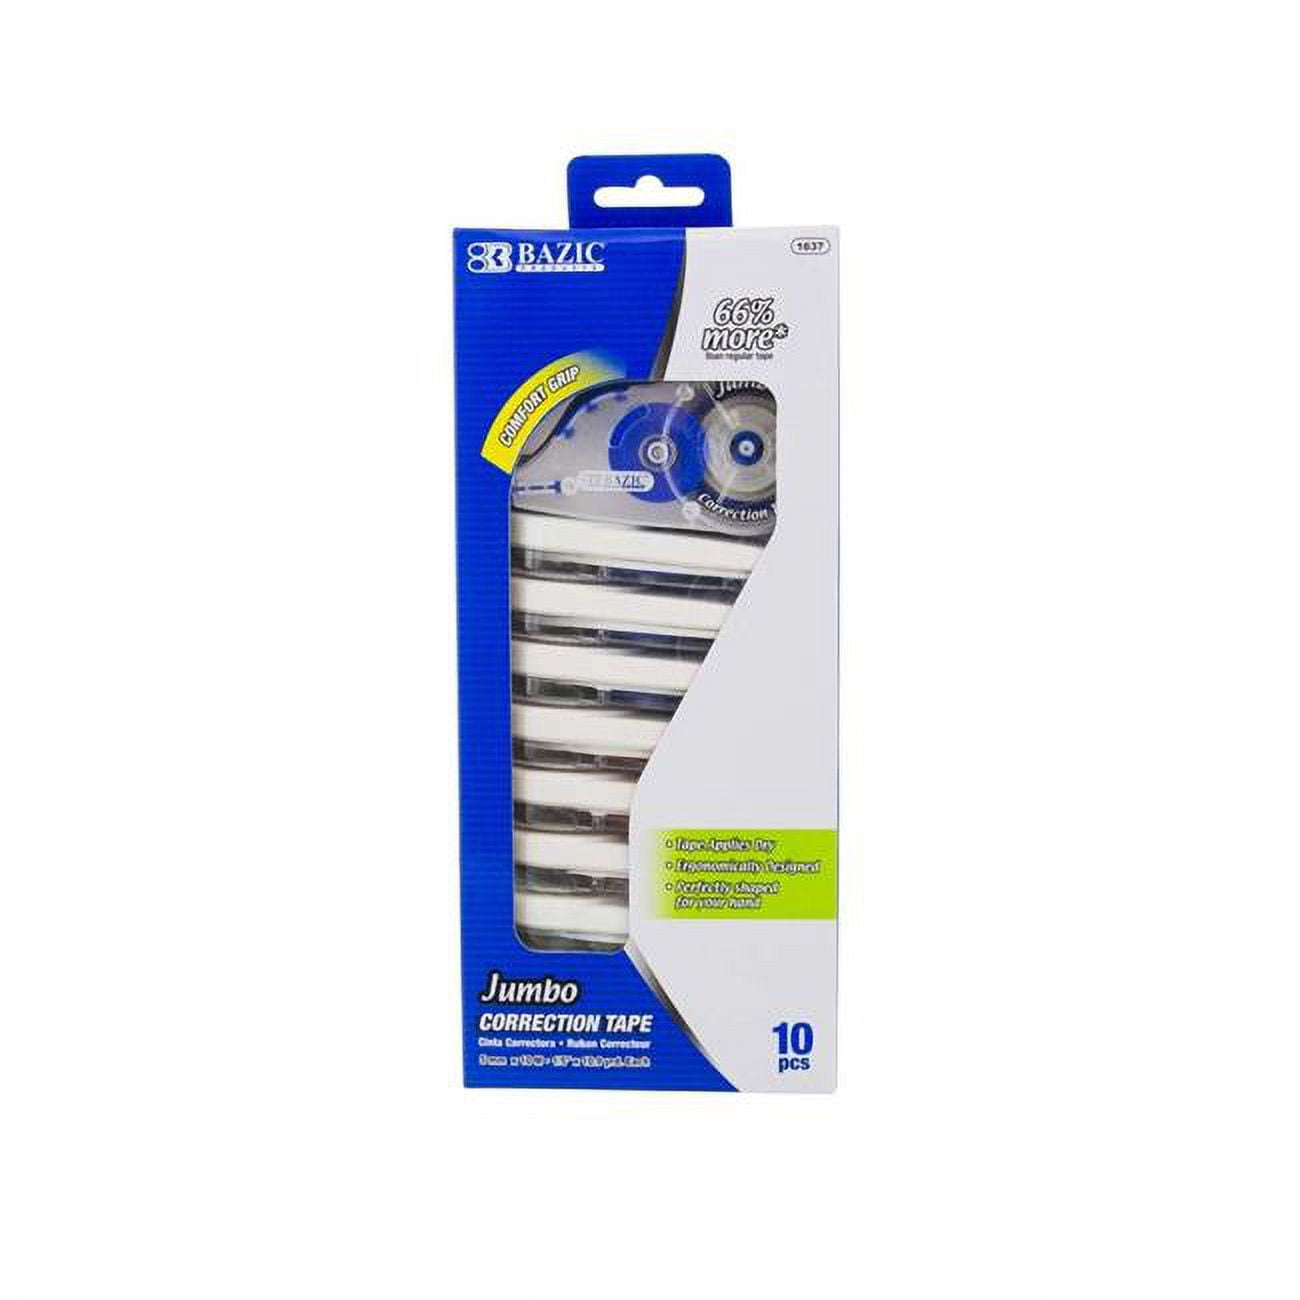 Picture of DDI 2363638 Jumbo Correction Tape Dispensers - 10 Per Pack - Case of 12